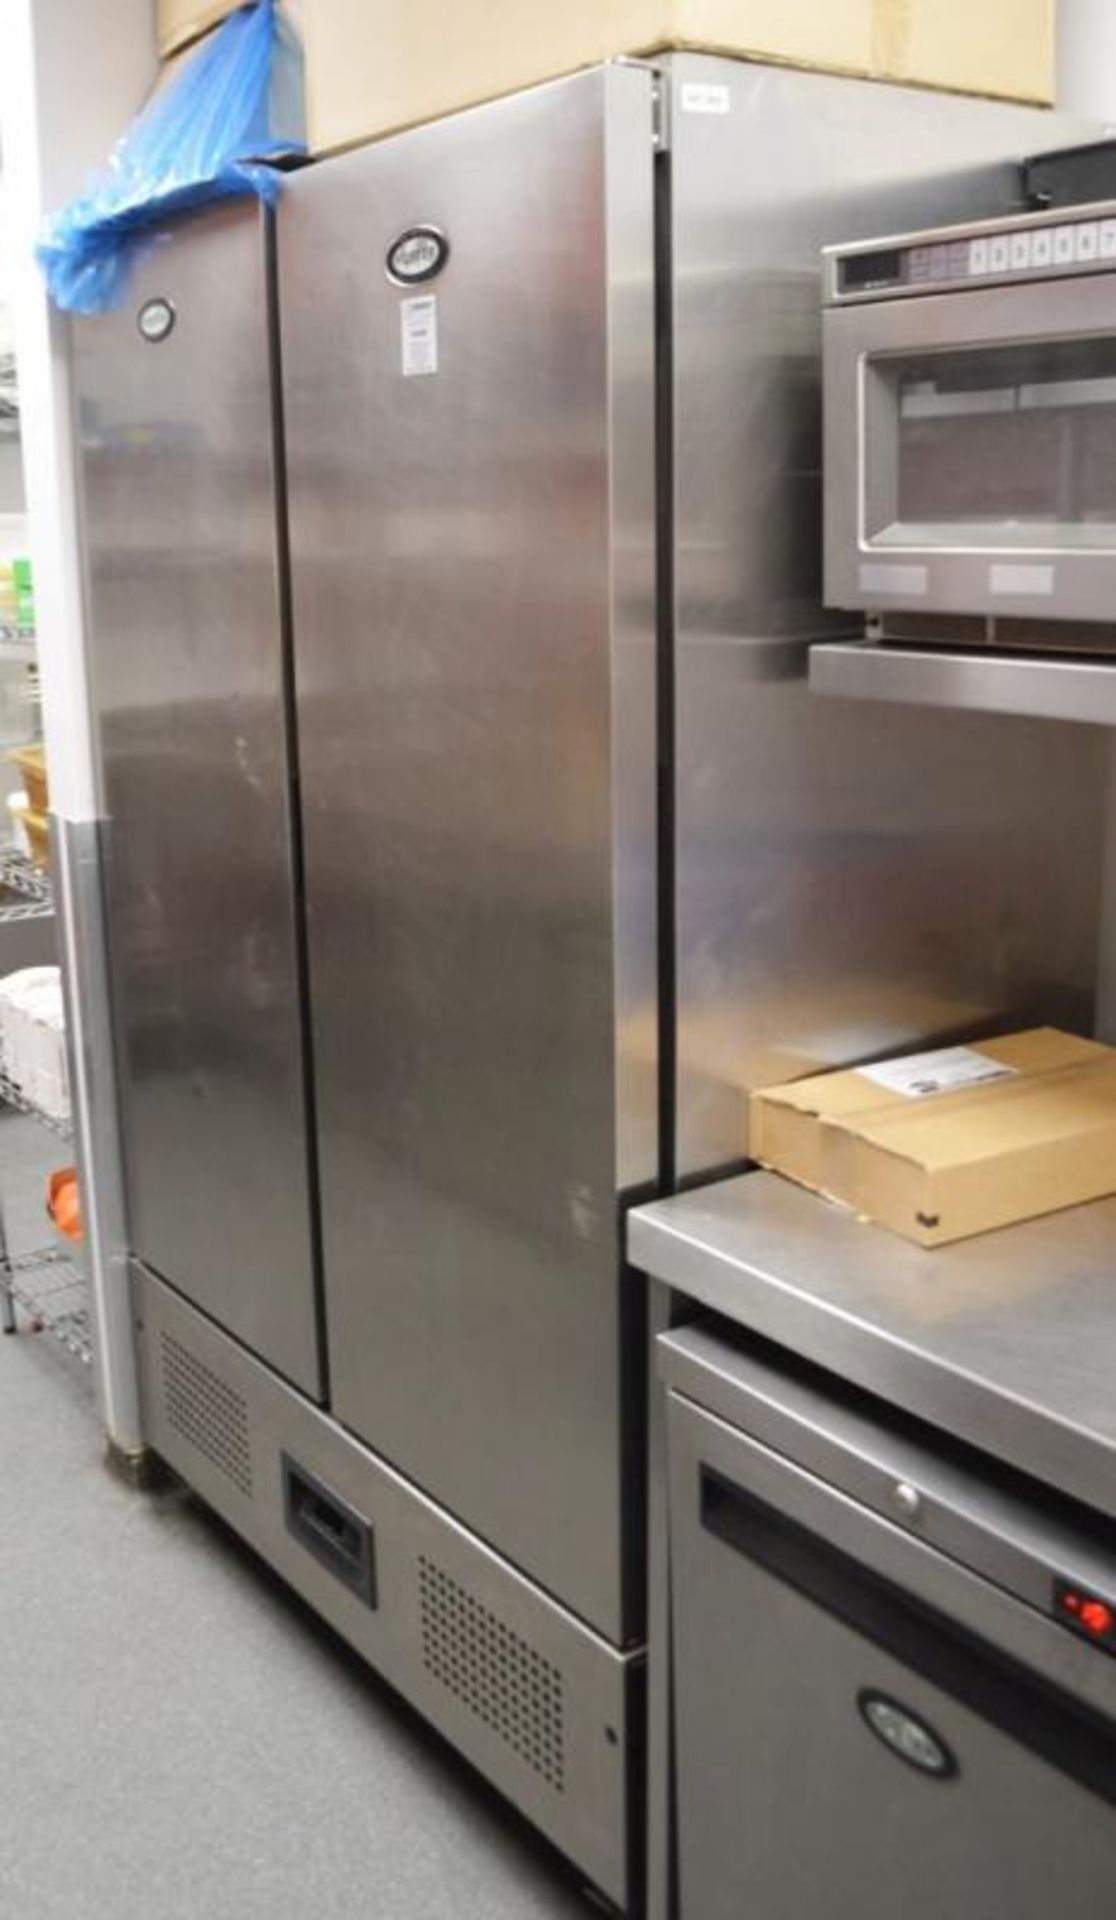 1 x Foster 800 Litre Double Door Meat Fridge With Stainless Steel Finish - Model FSL800M - Ref NC360